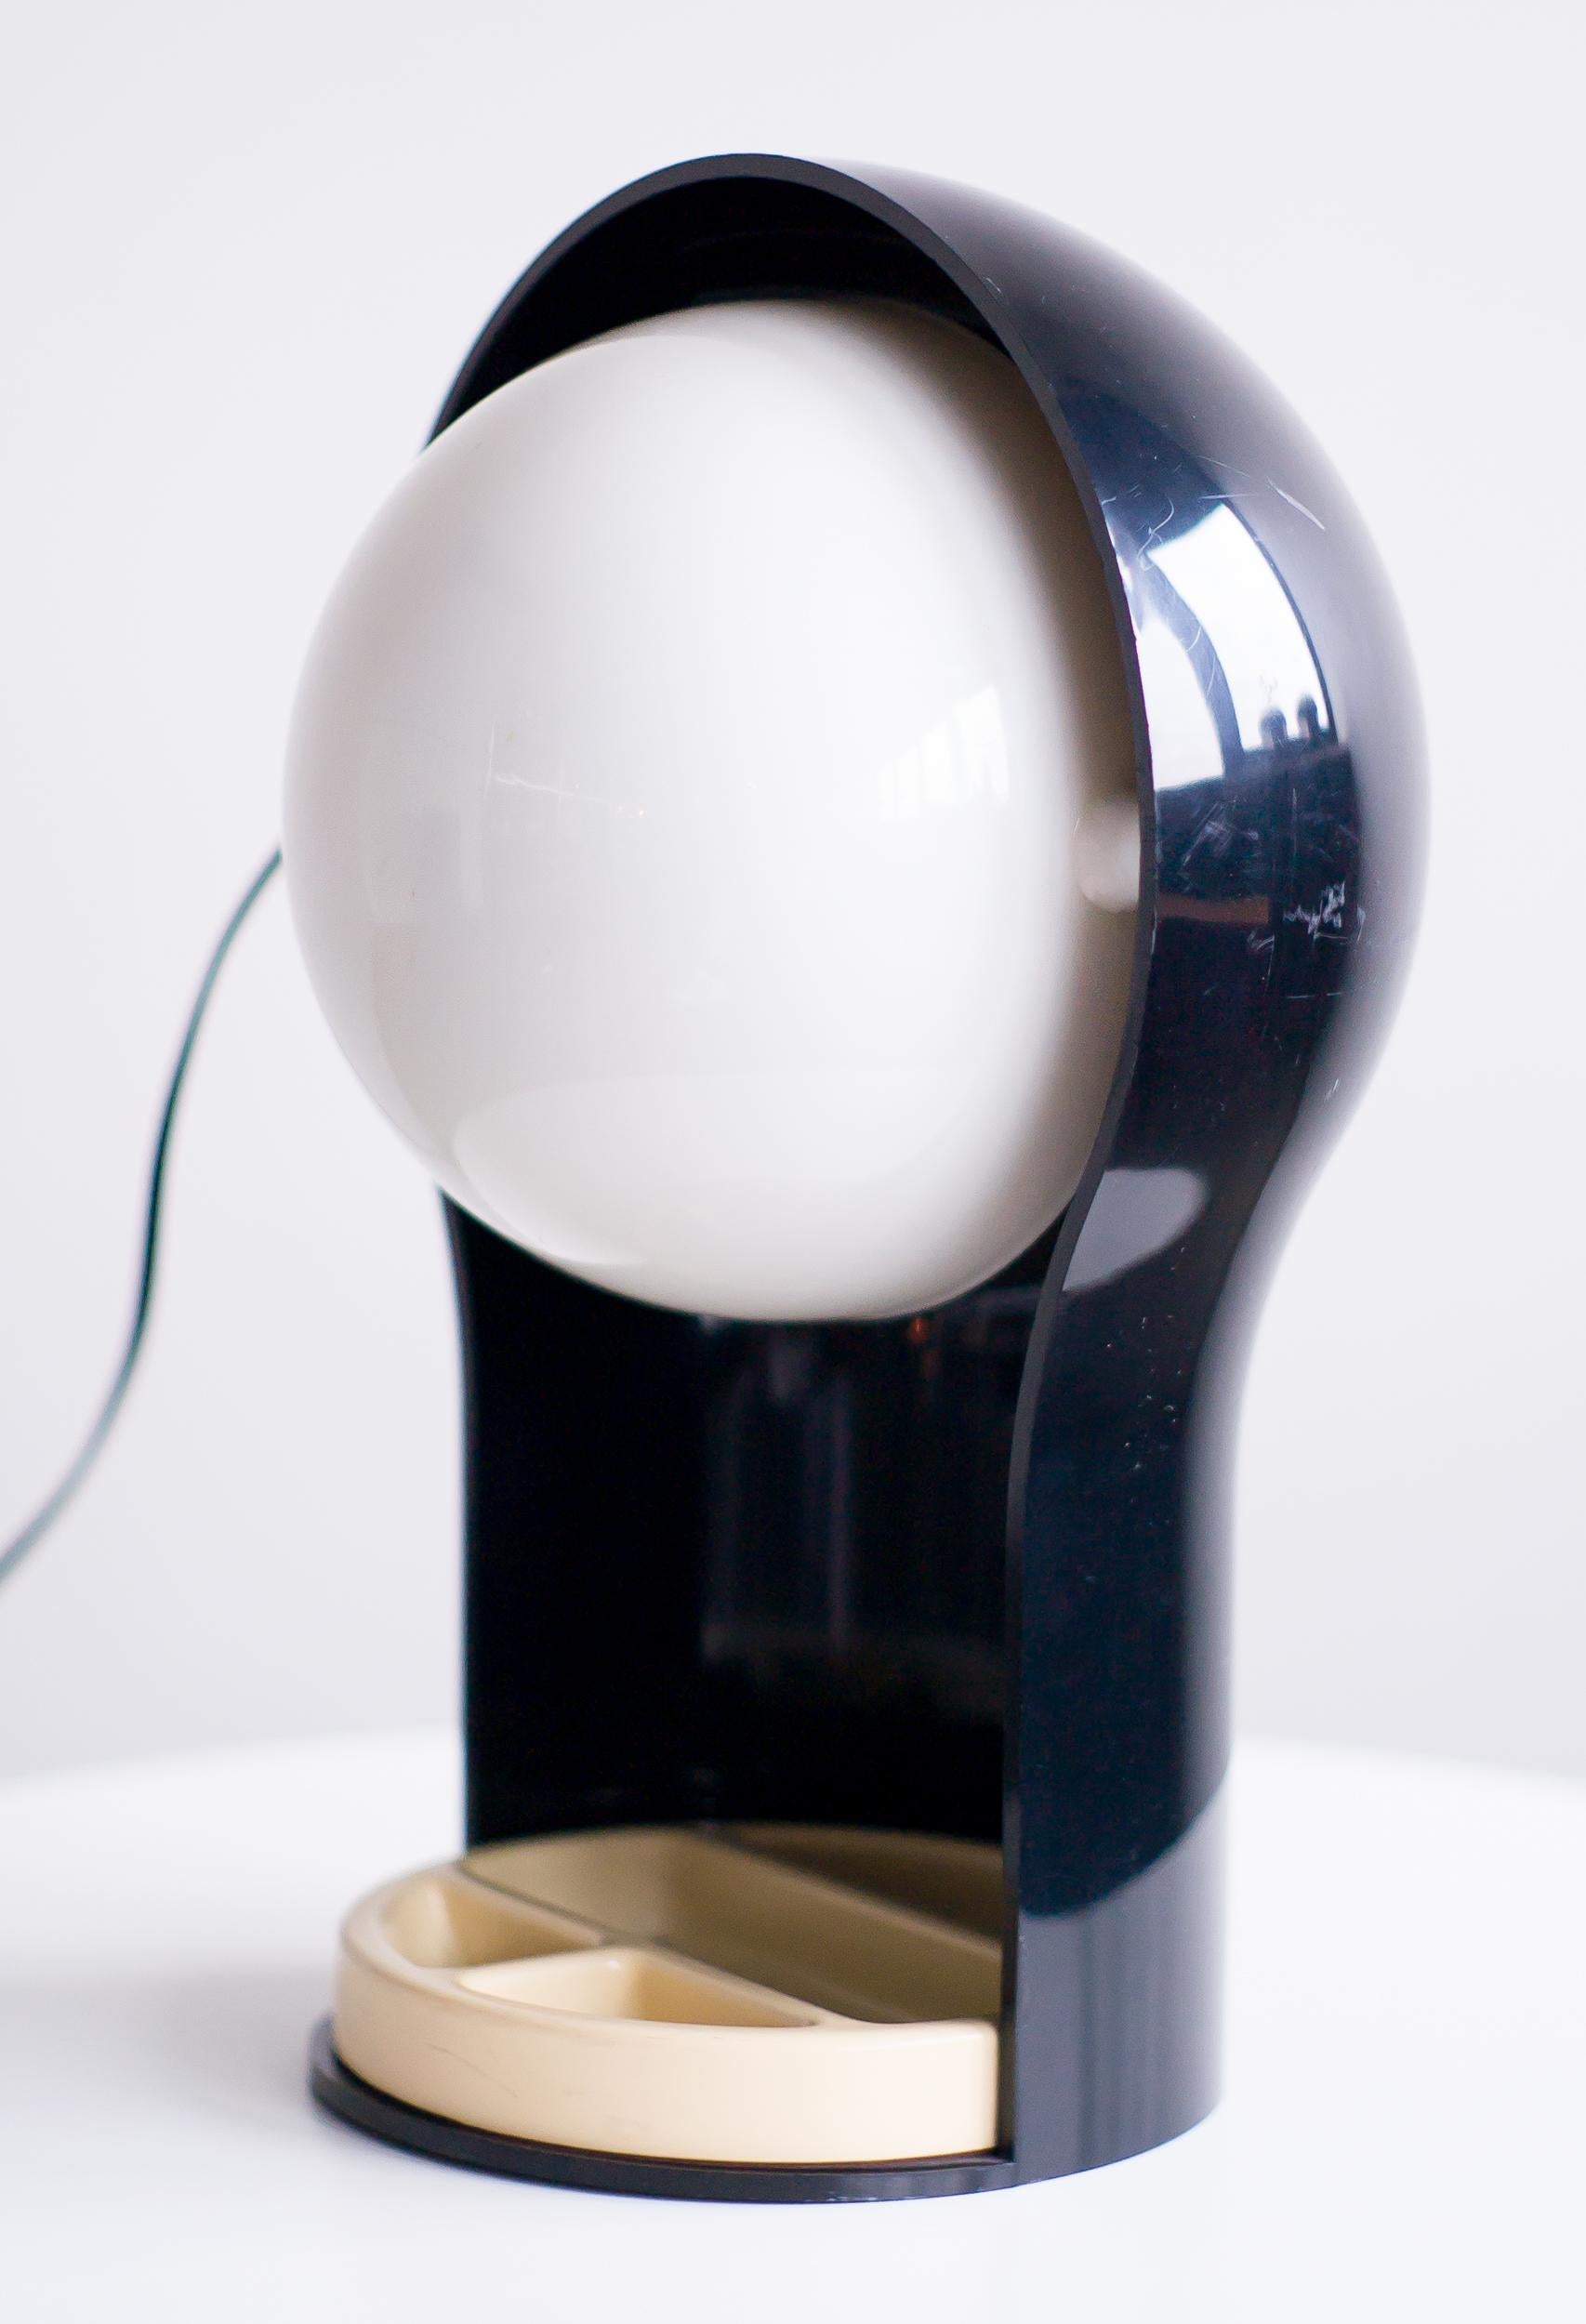 Acrylic table or desk lamp designed by Vico Magistretti for Artemide.
Wiring suitable for use in the USA.